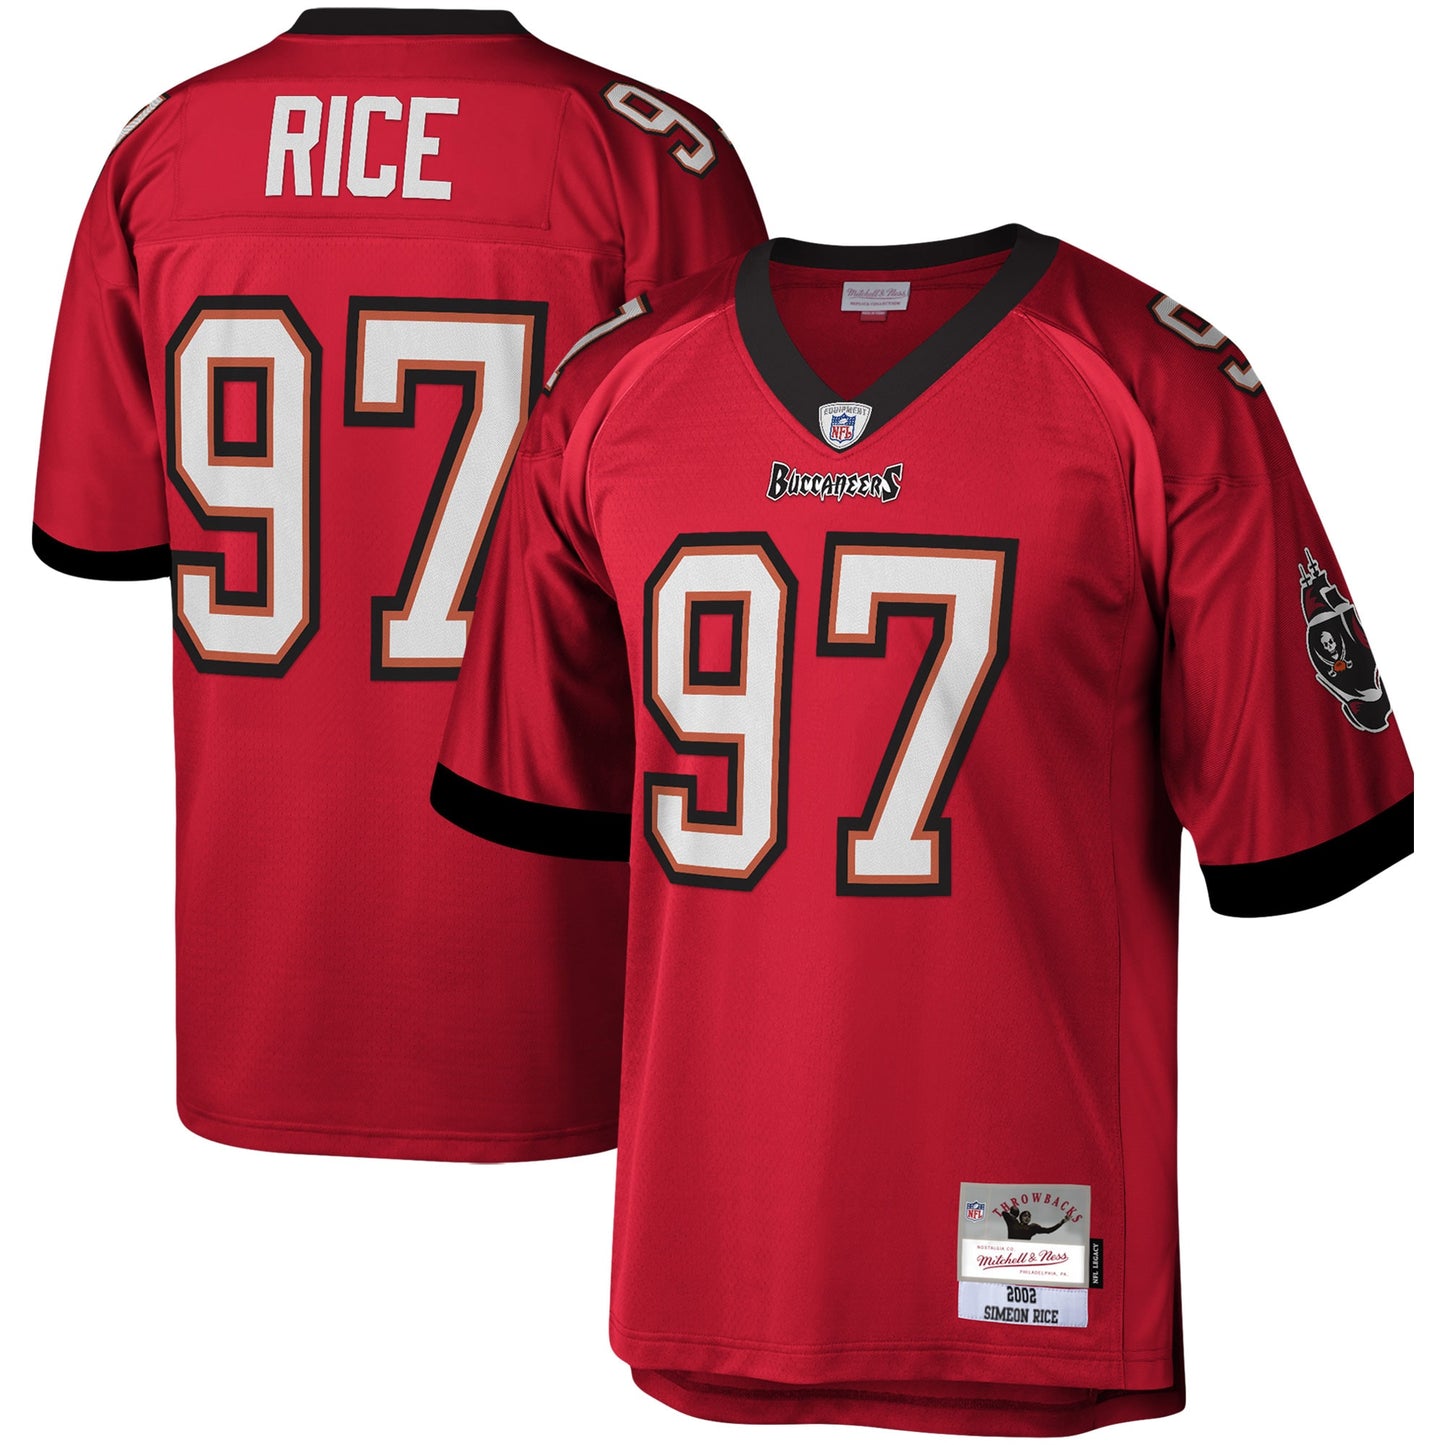 Simeon Rice Tampa Bay Buccaneers Mitchell & Ness Legacy Replica Jersey - Red